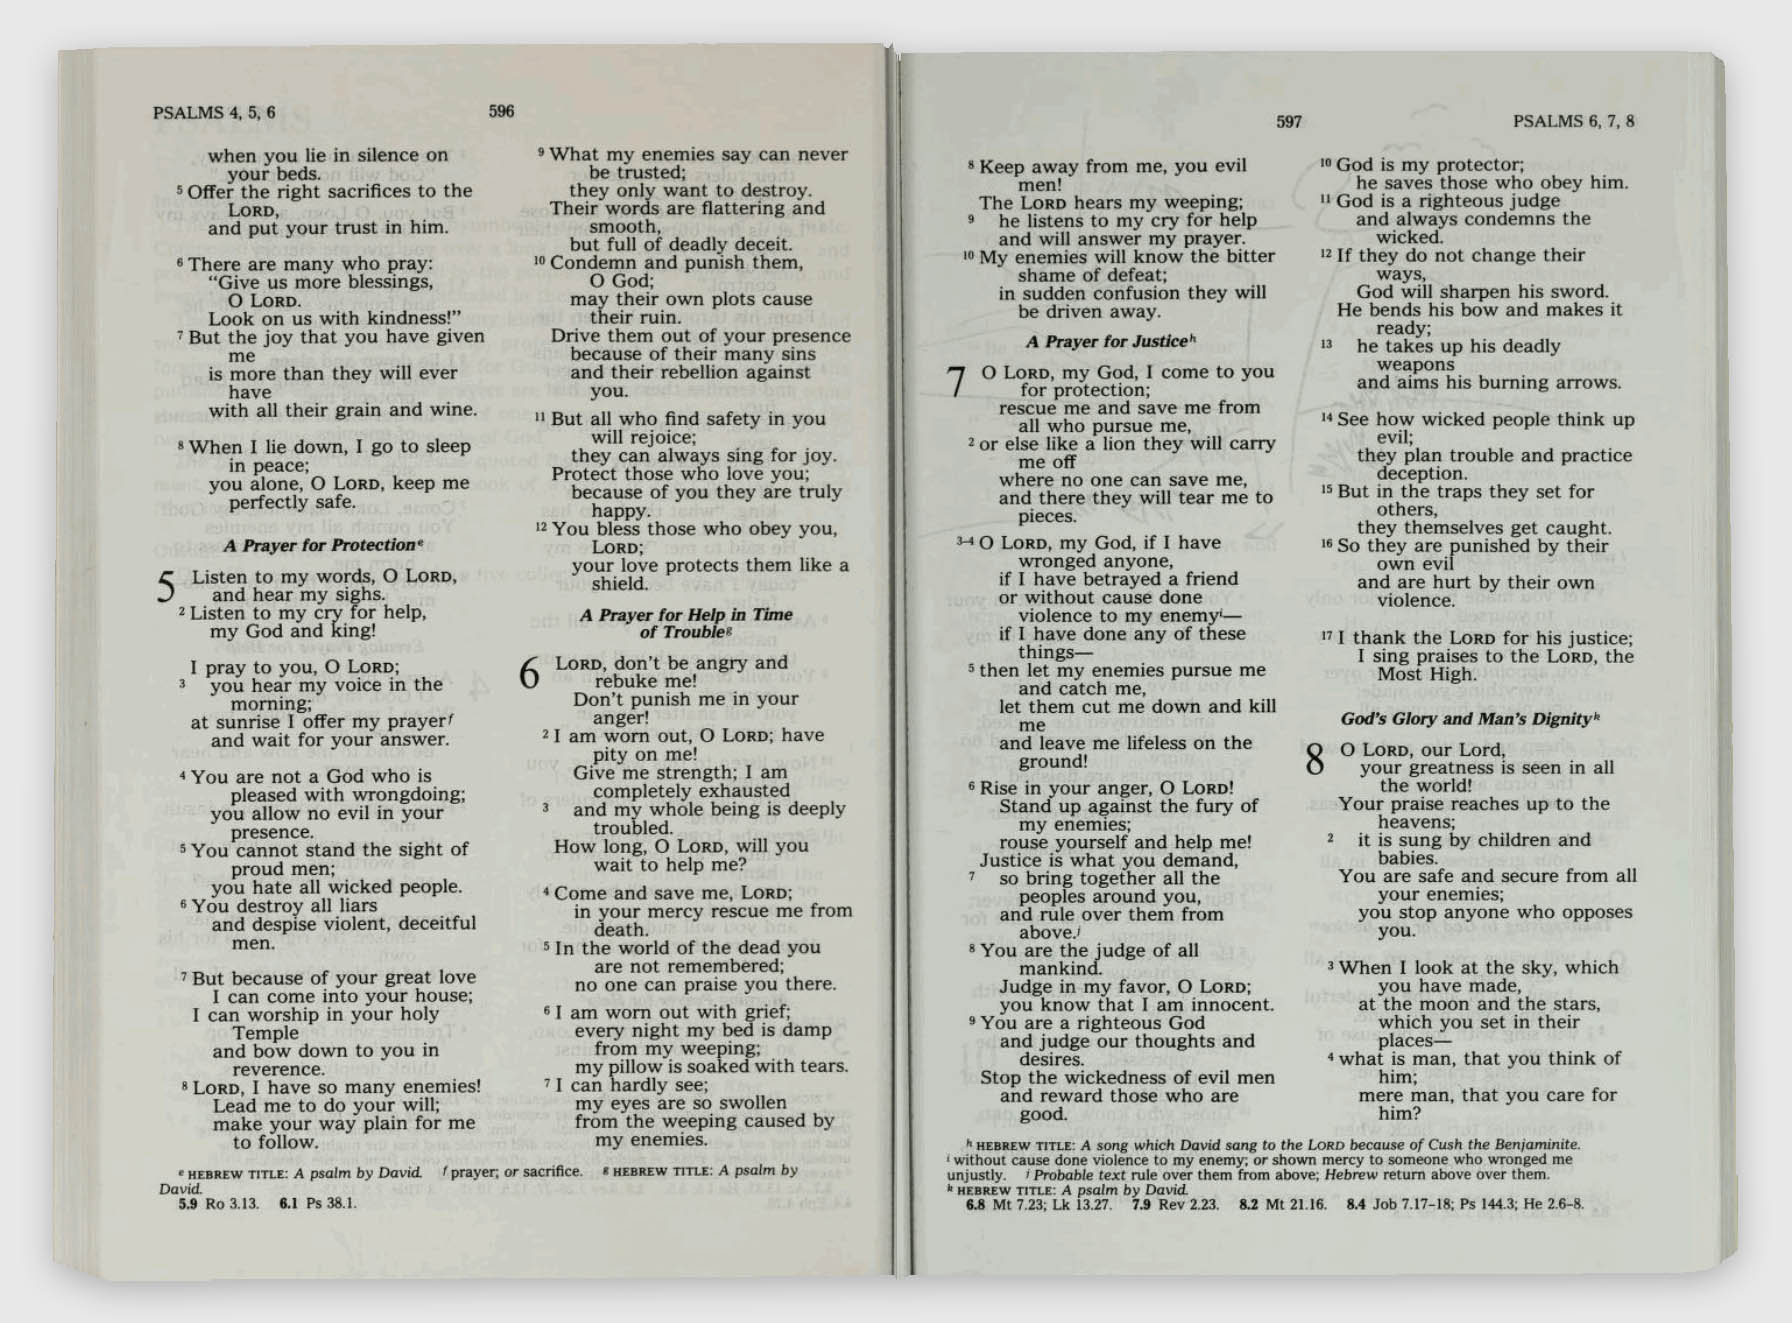 Psalm 7 from the Good News Bible published by the American Bible Society, 1976. Courtesy: Internet Archive.